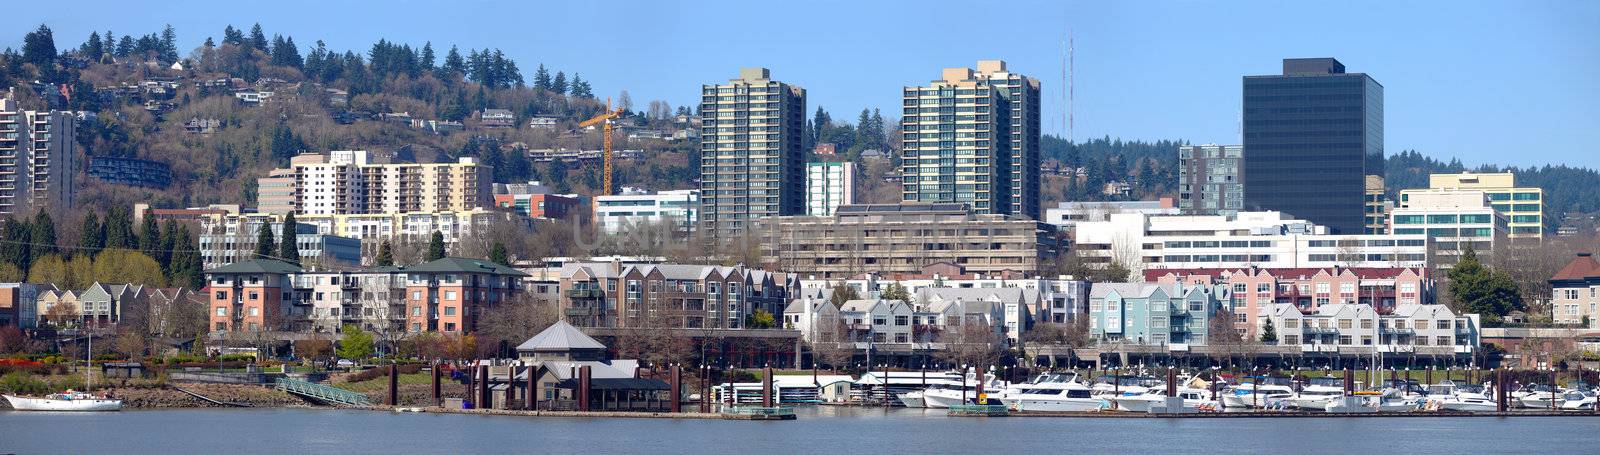 A closer view of the marina and neighborhood in Portland Oregon.